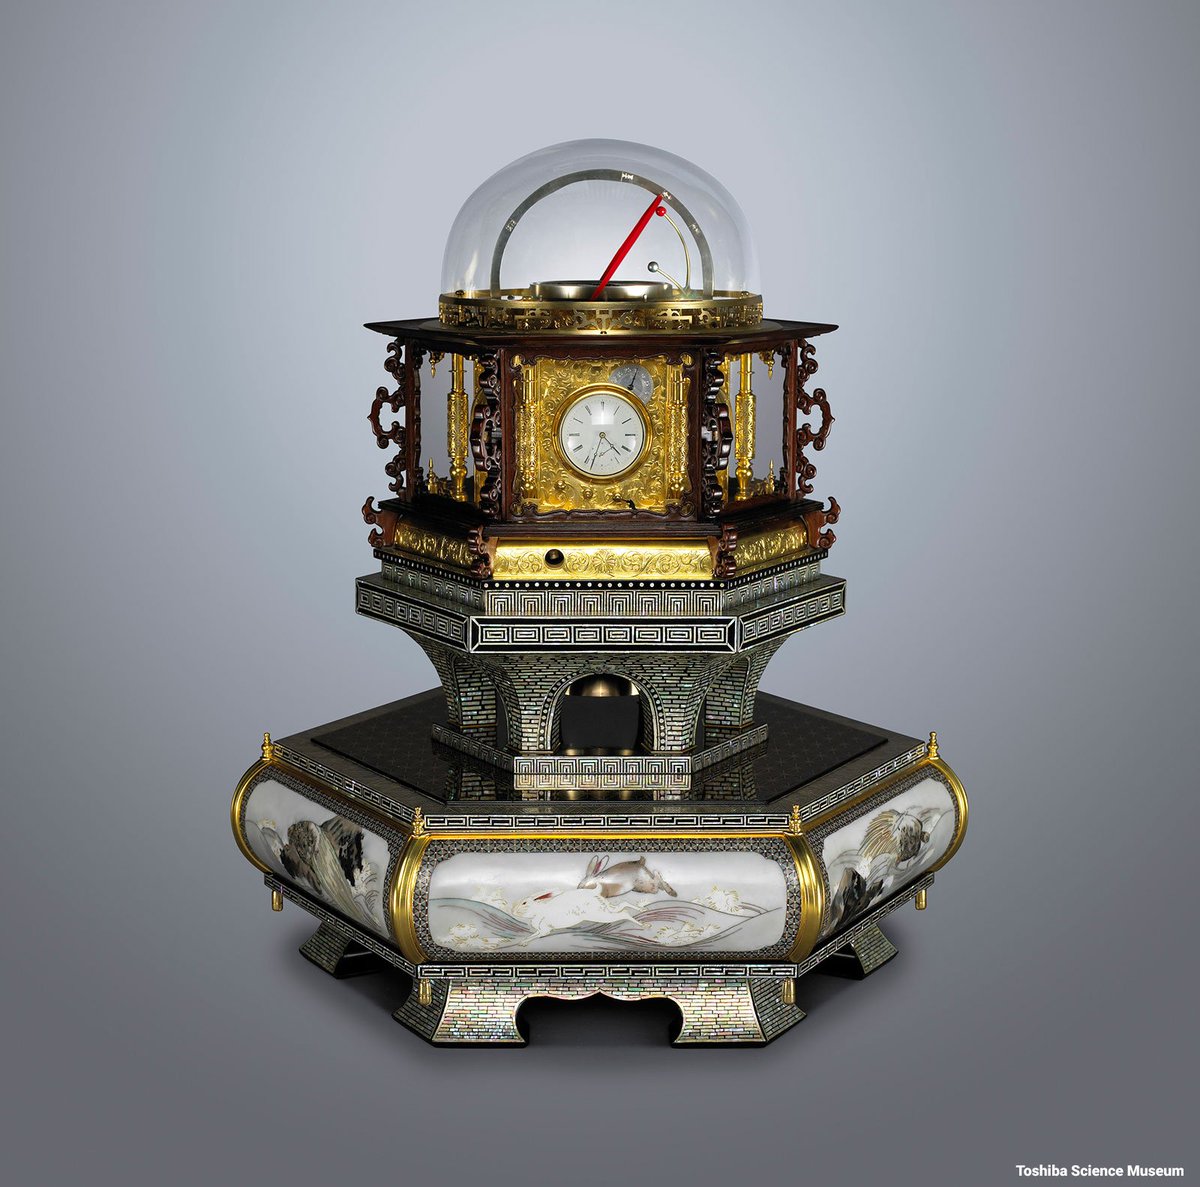 This era of Japanese clockmaking culminated with the creation of the Myriad Year Clock in 1851. (万年自鳴鐘 or Mannen Jimeishou)*Two years before Japan would open its gates again to the West*21 years before Japan would officially adopt the Western way of measuring time.